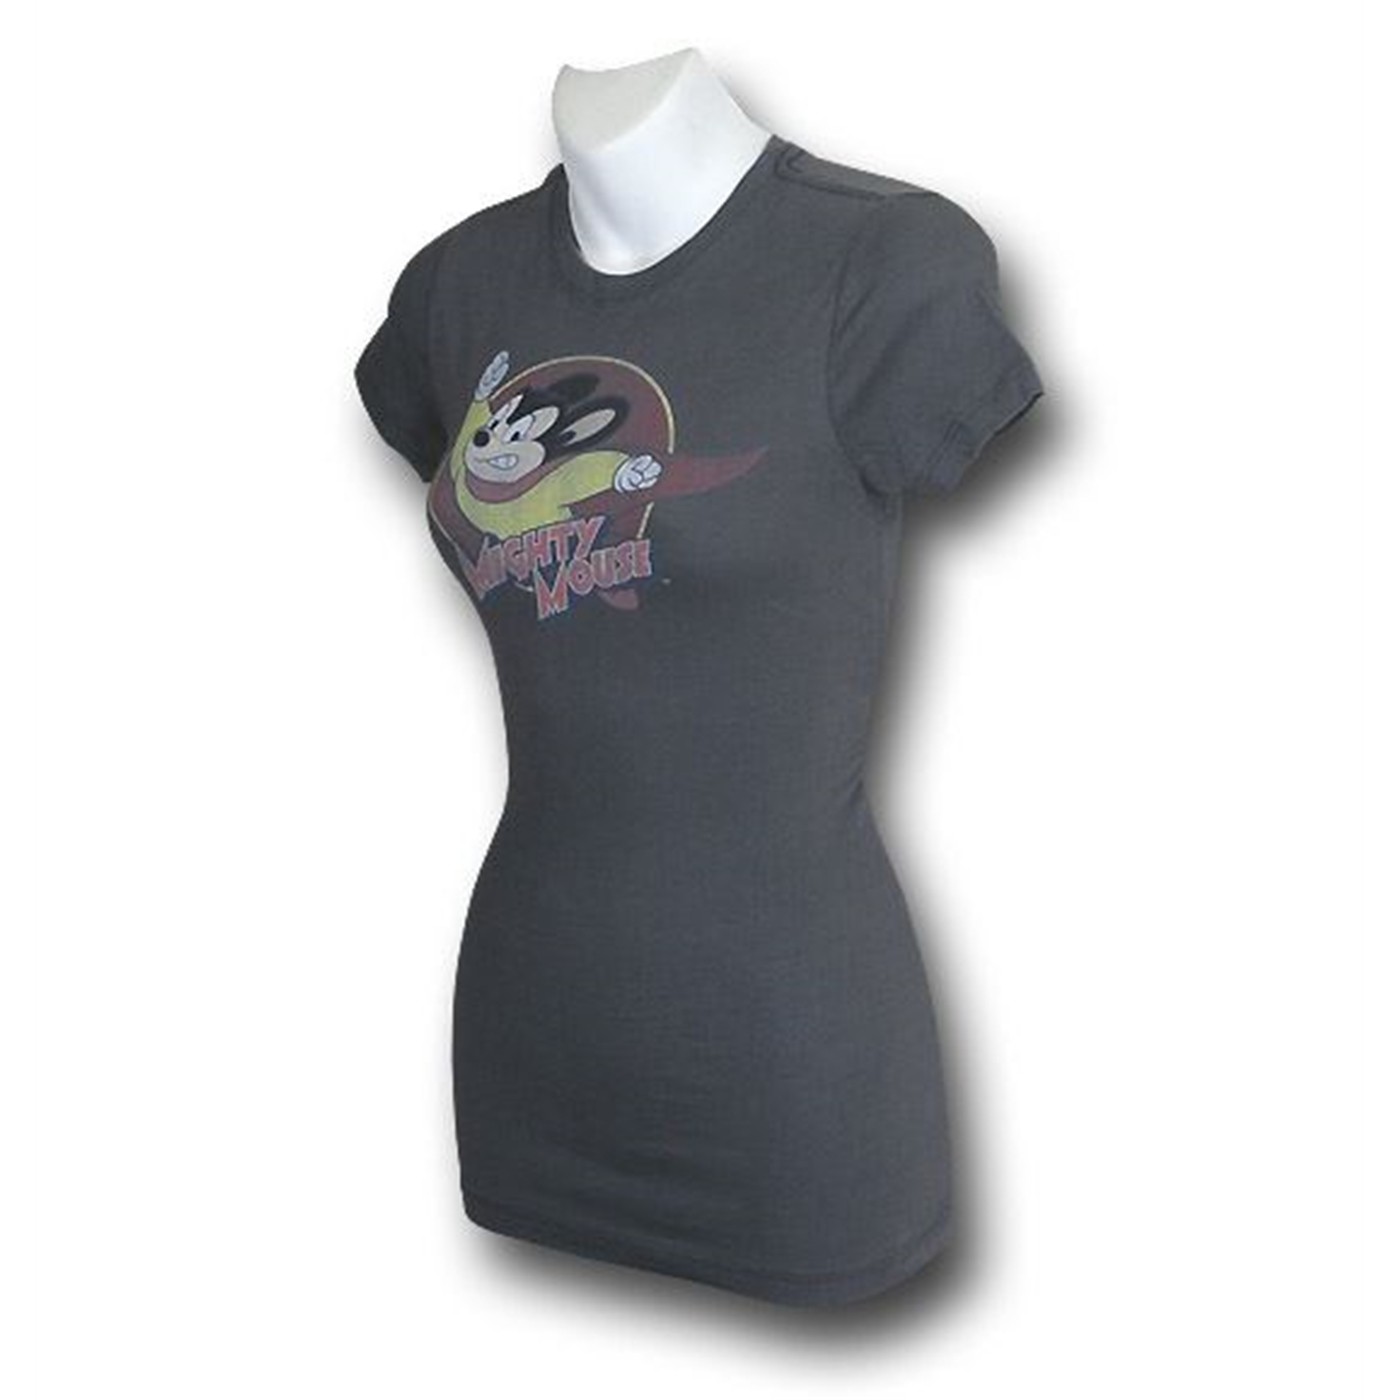 Mighty Mouse Toughie Junior Womens T-Shirt